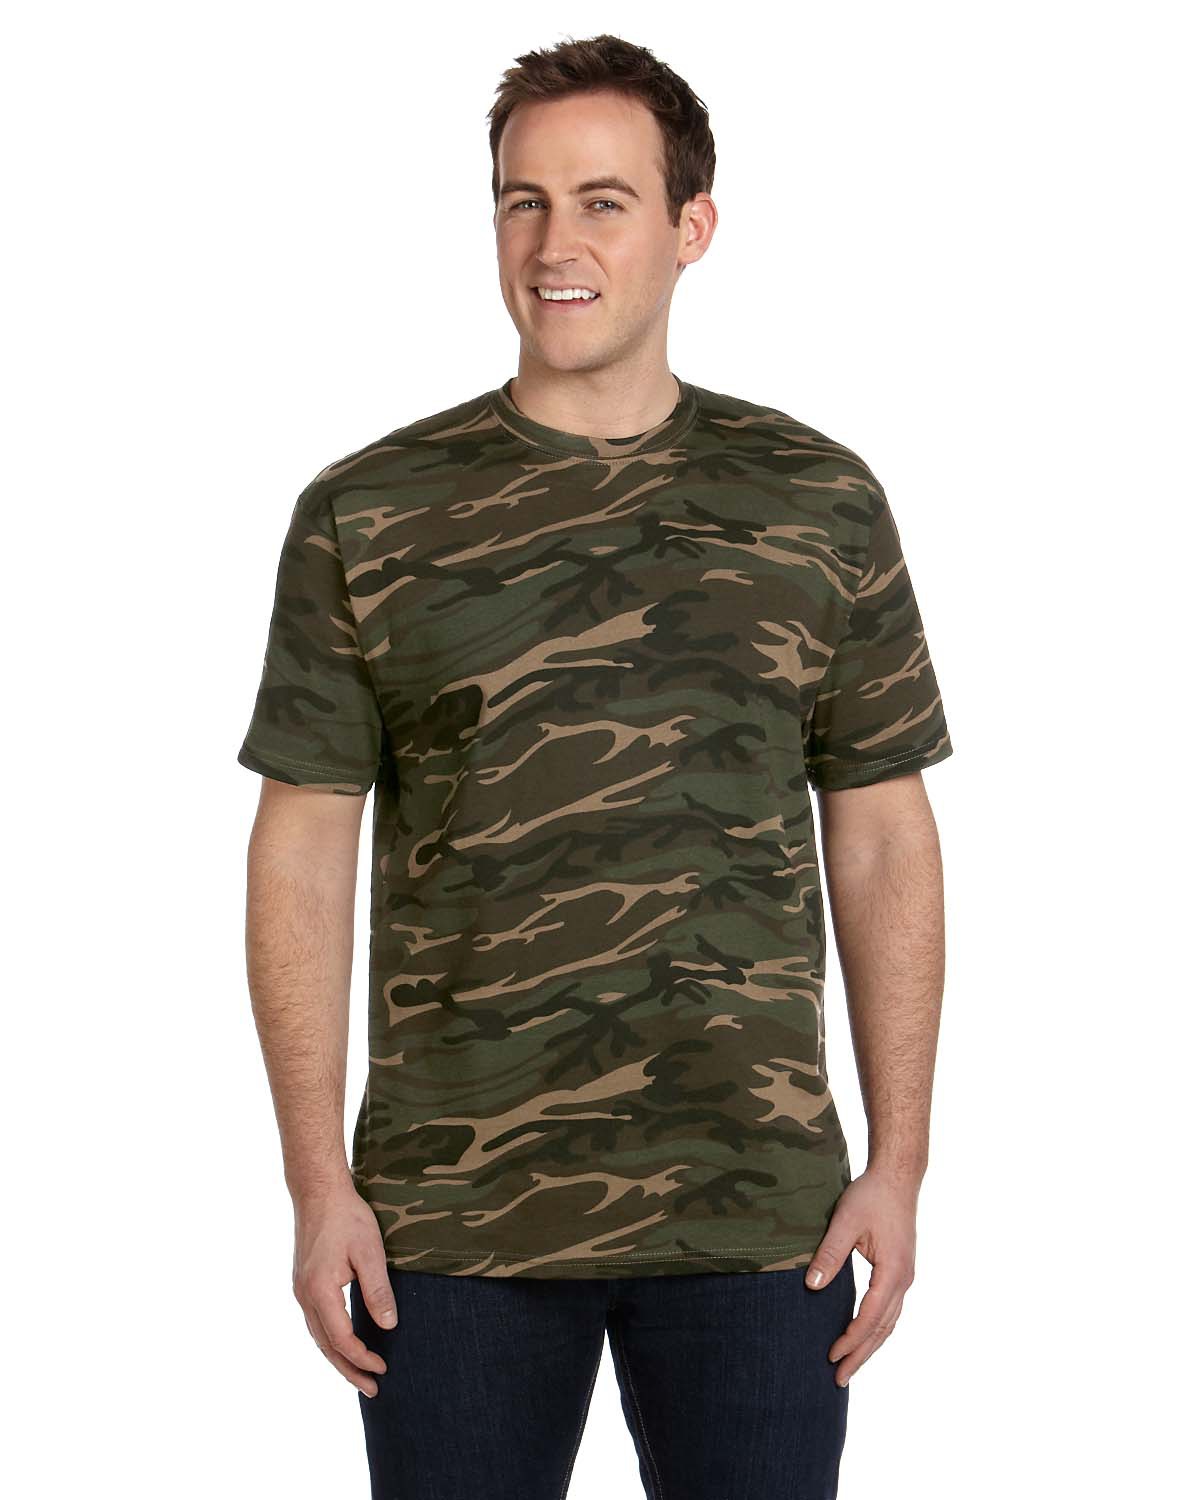 939 Anvil Midweight Camouflage T-Shirt